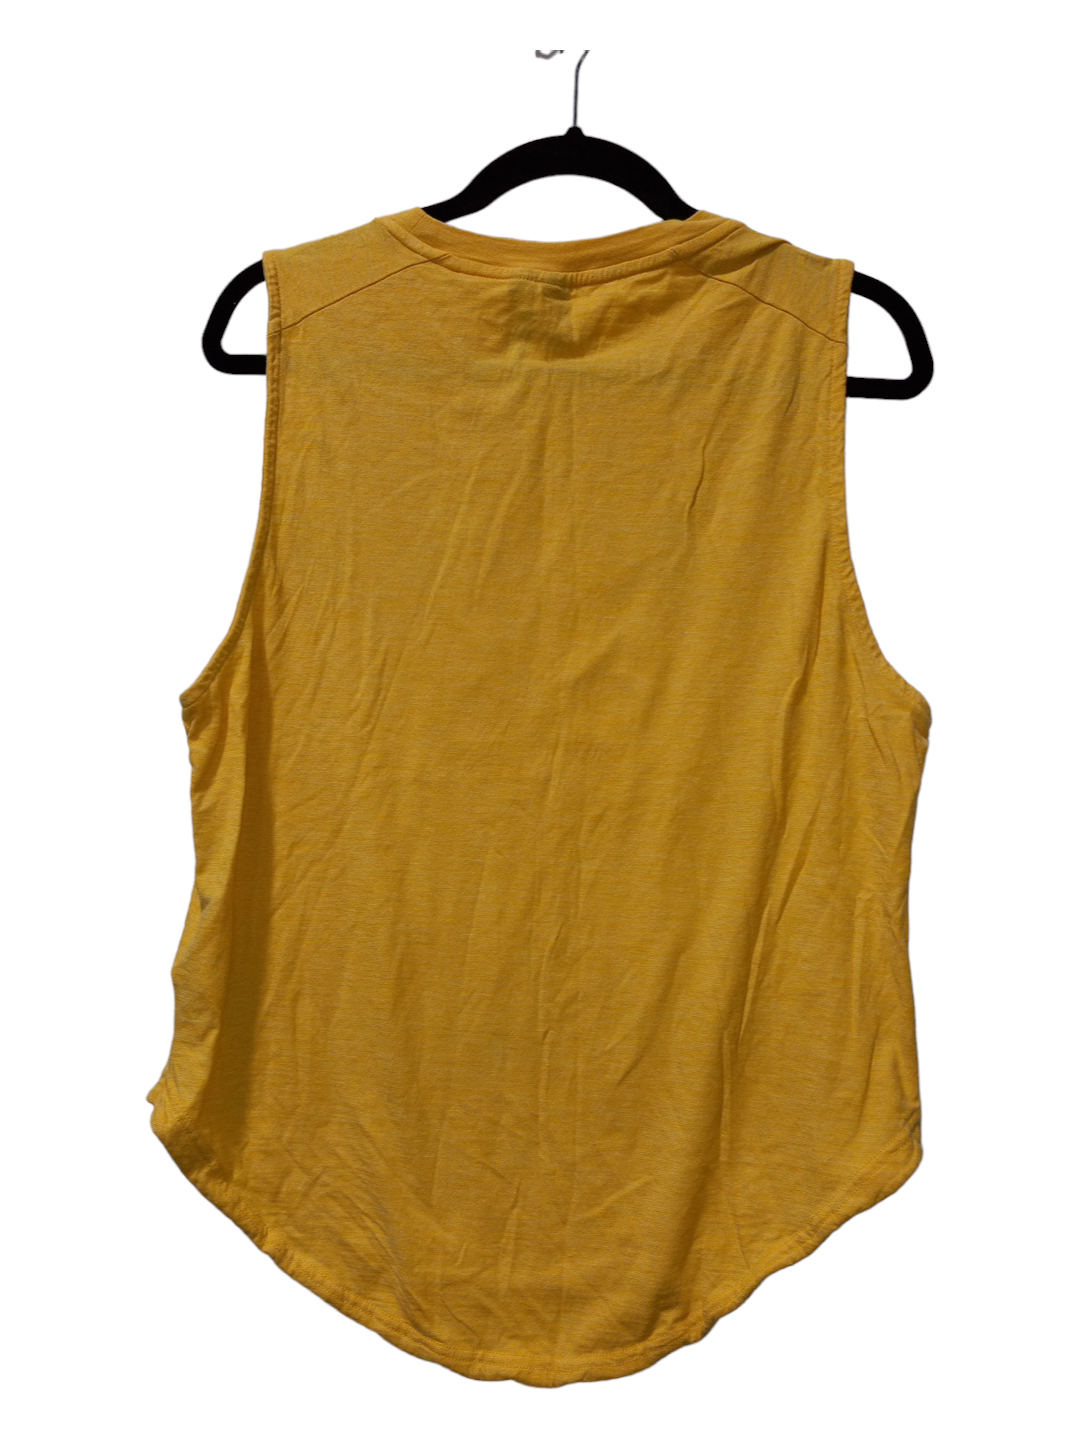 Yellow Athletic Tank Top Adidas, Size S